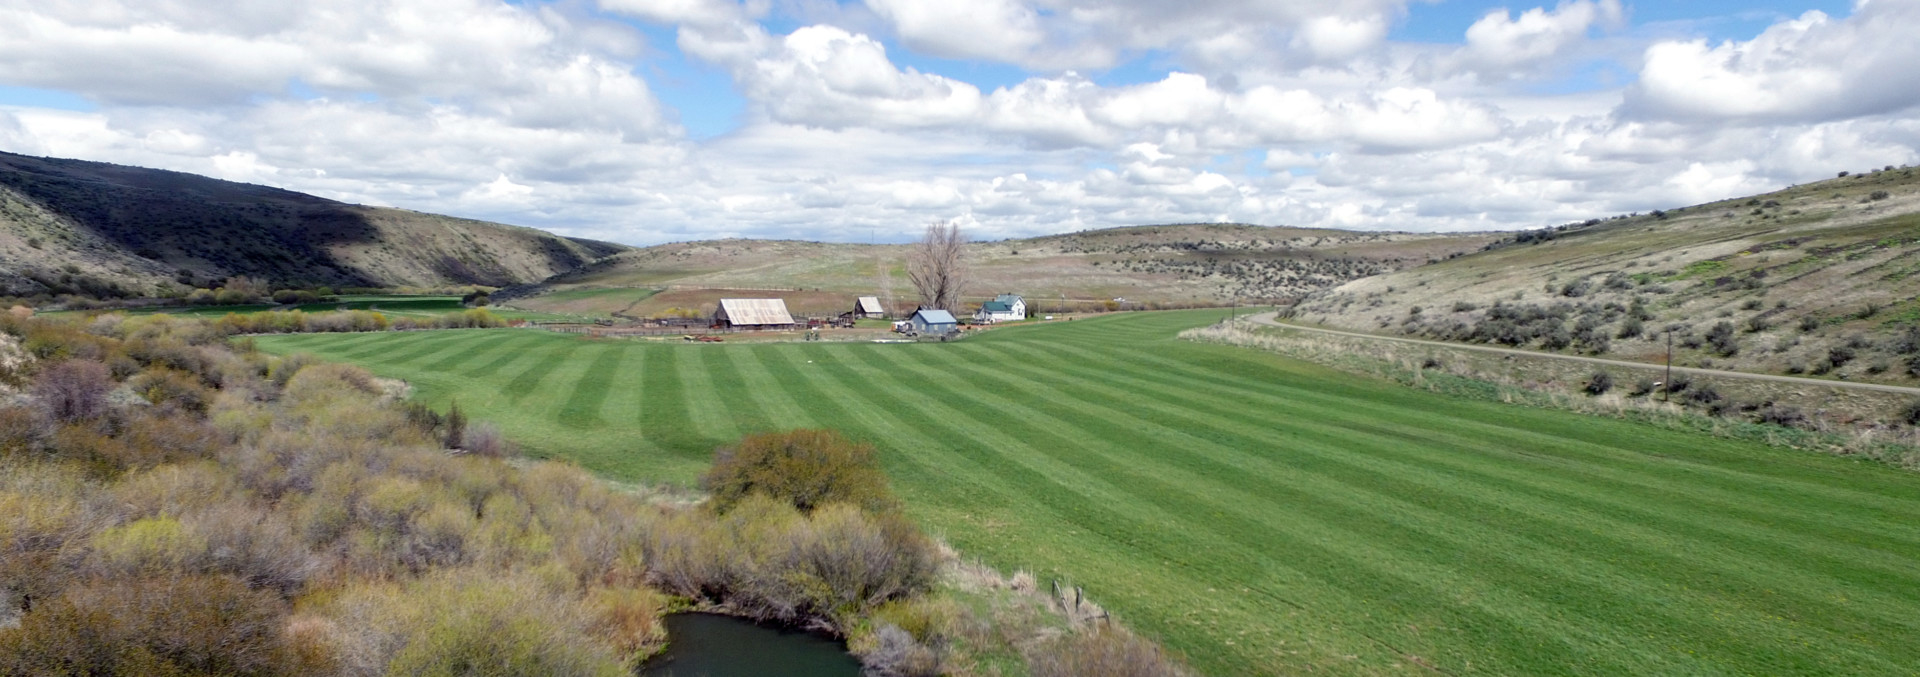 Idaho Ranch Property for Sale Silver Sage Ranch